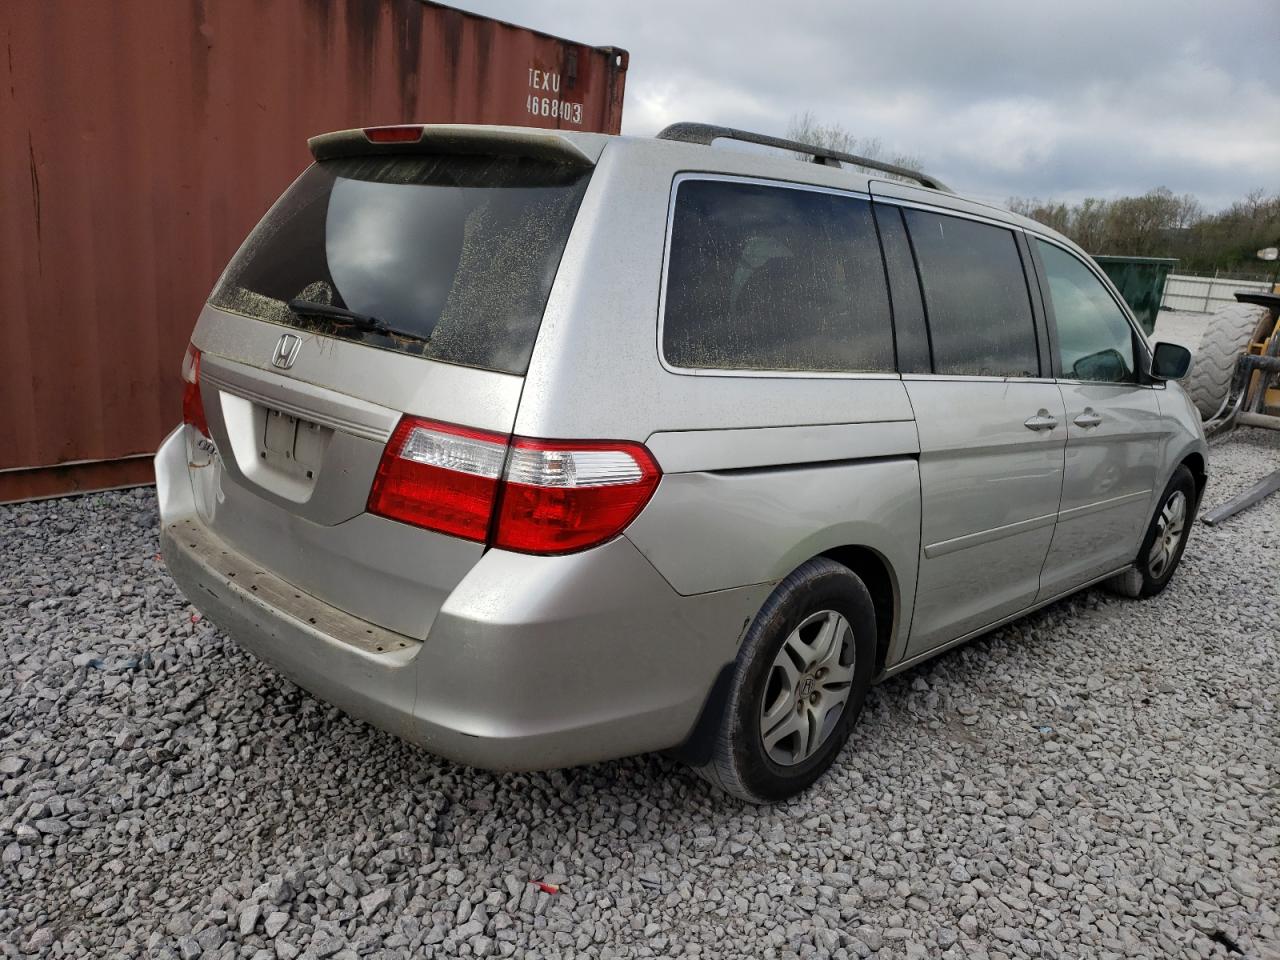 5FNRL386X7B****** Salvage and Repairable 2007 Honda Odyssey in AL - Hueytown